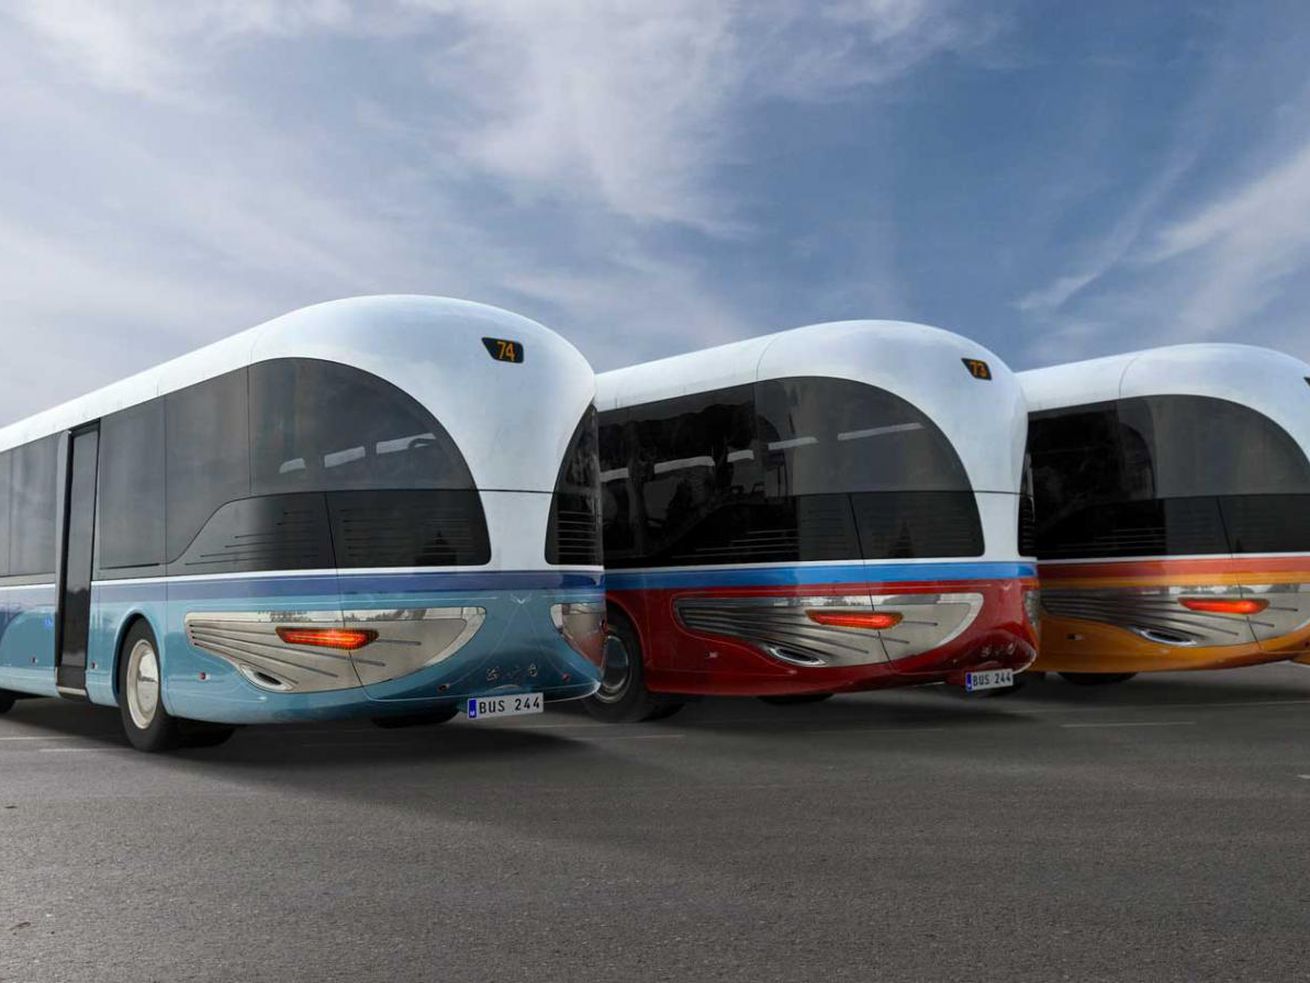 Malta?s iconic Art Deco buses get an eco-friendly modern remake